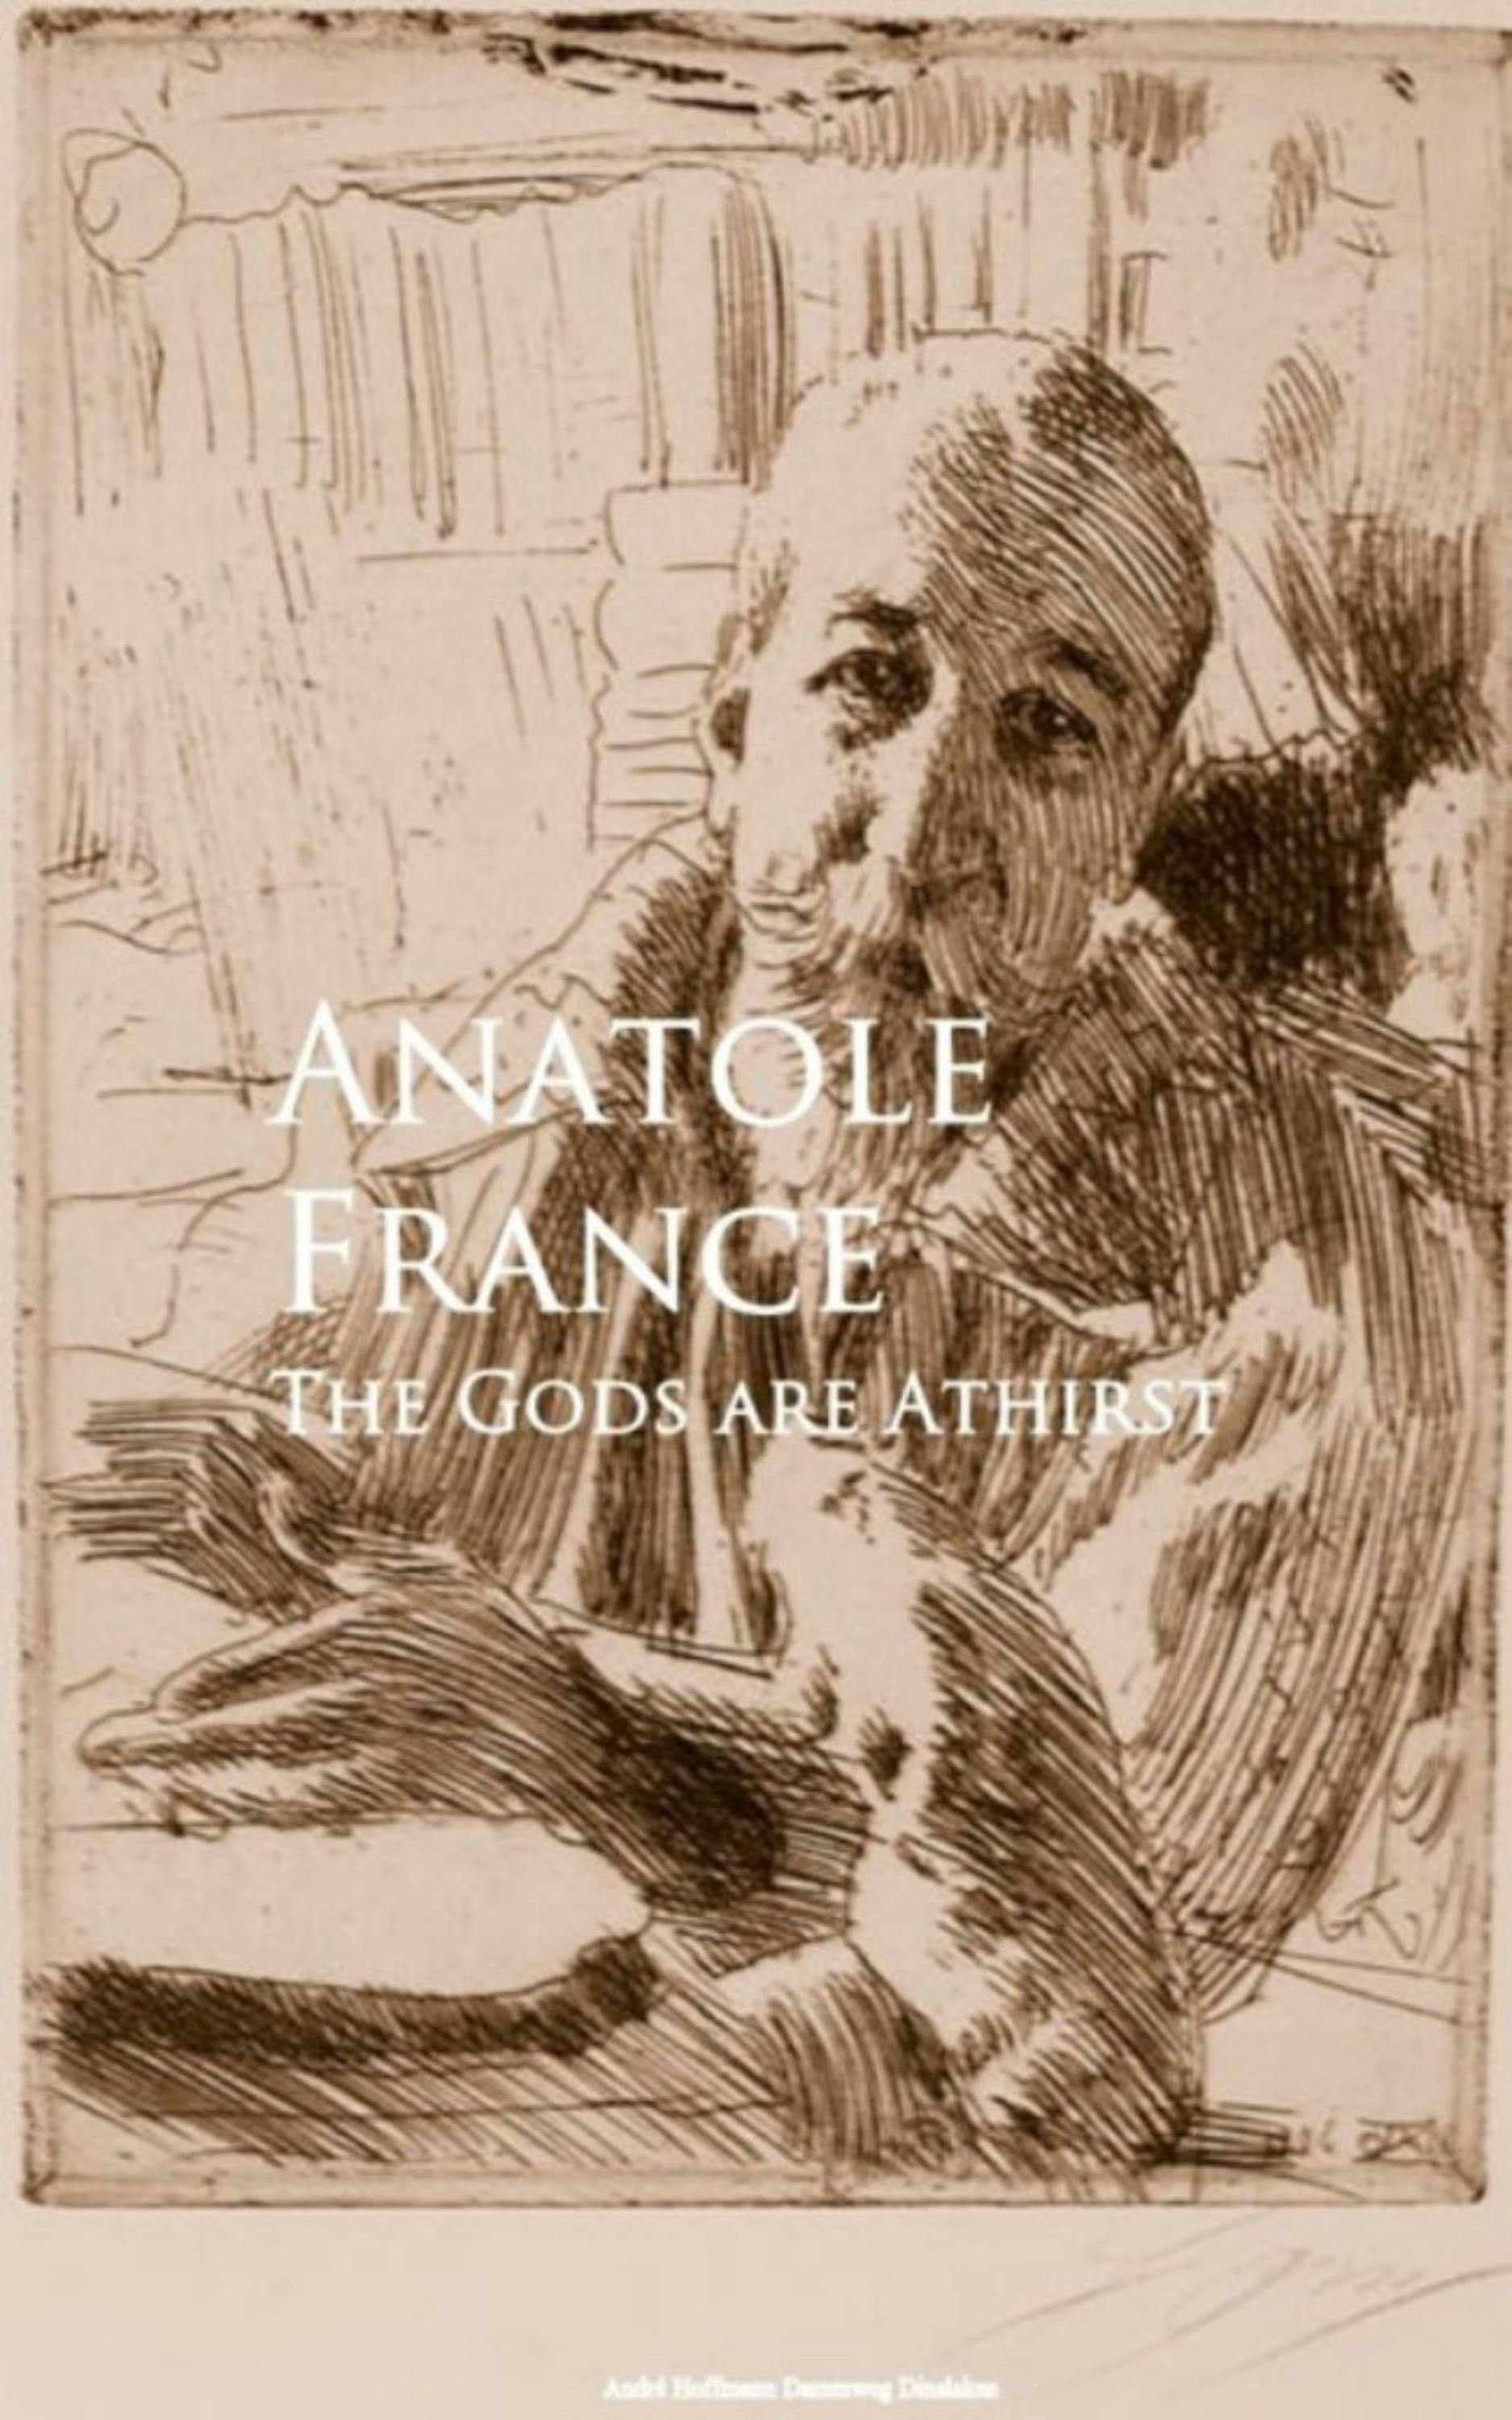 The Gods are Athirst - Anatole France